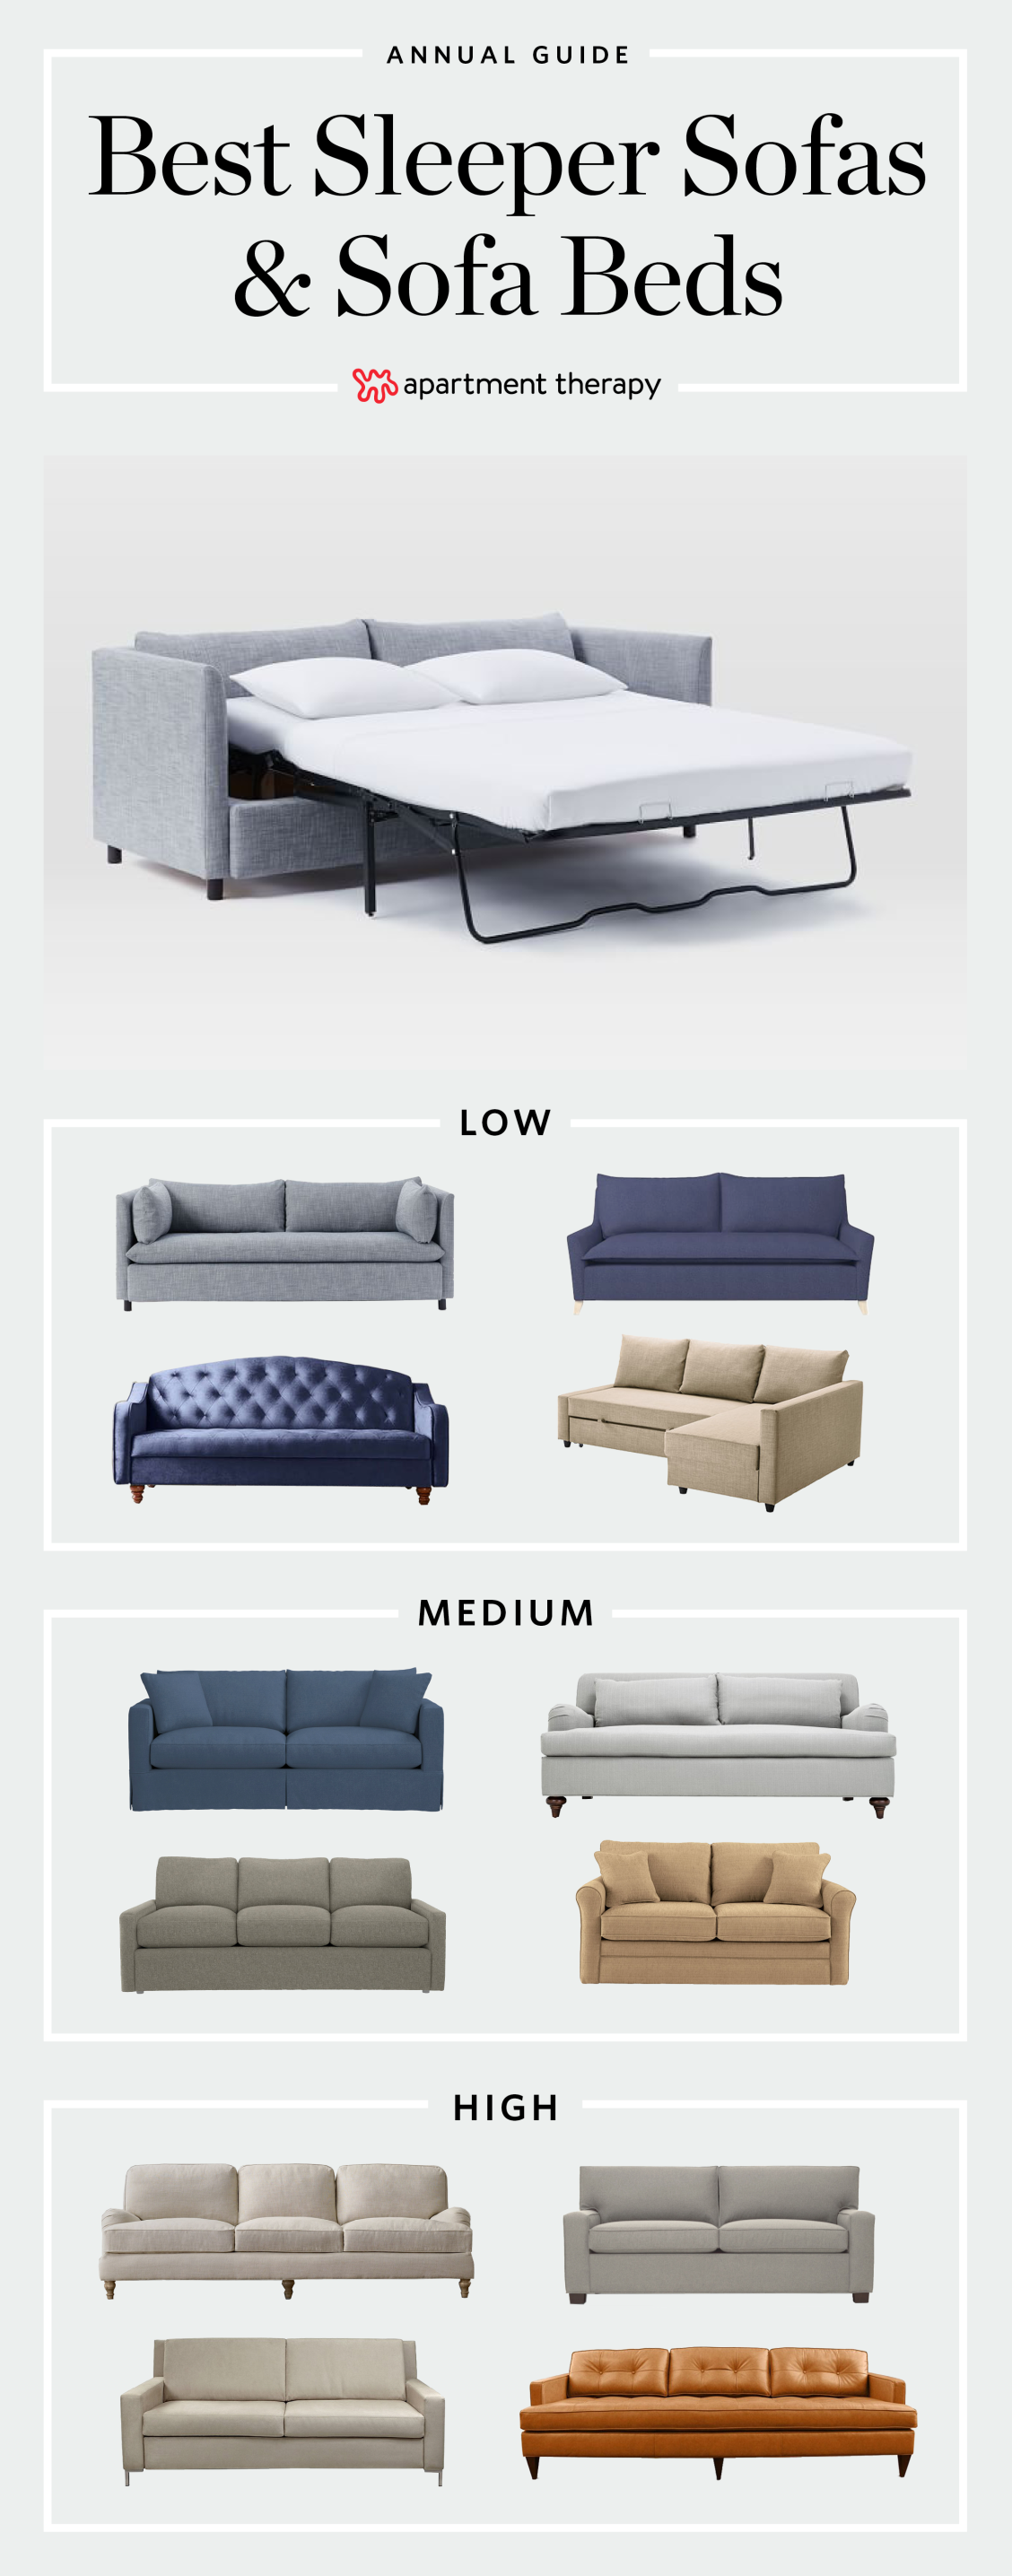 The Best Sleeper Sofas and Sofa Beds